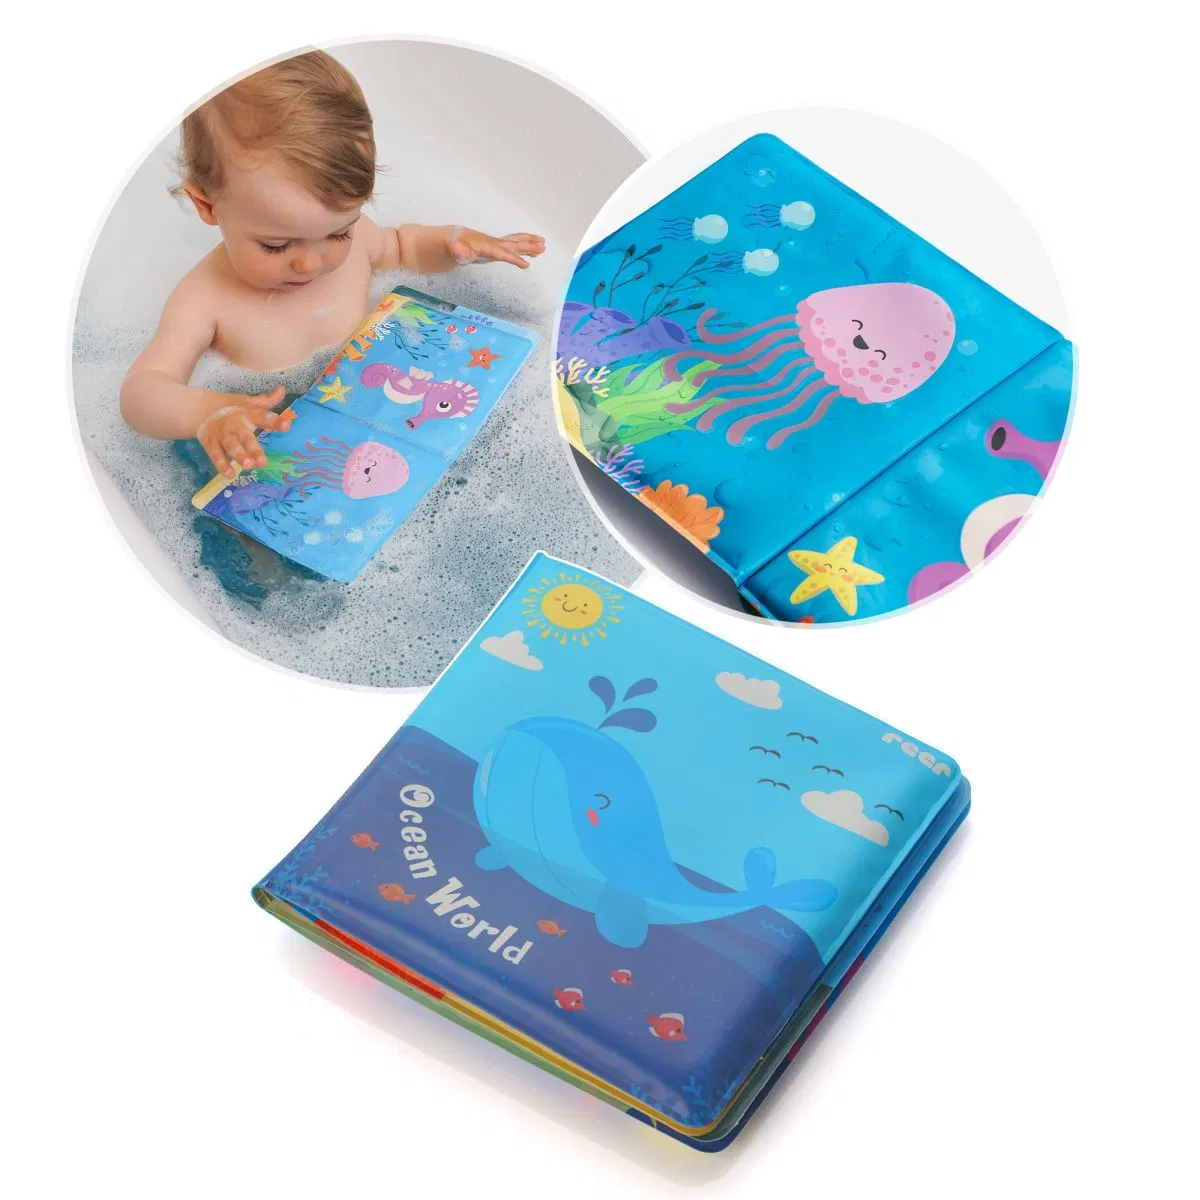 Skoodle Little Learners Baby Book Gift Set with Bath Books, Board Books, Cloth Books and Bear Plush PAL for Kids